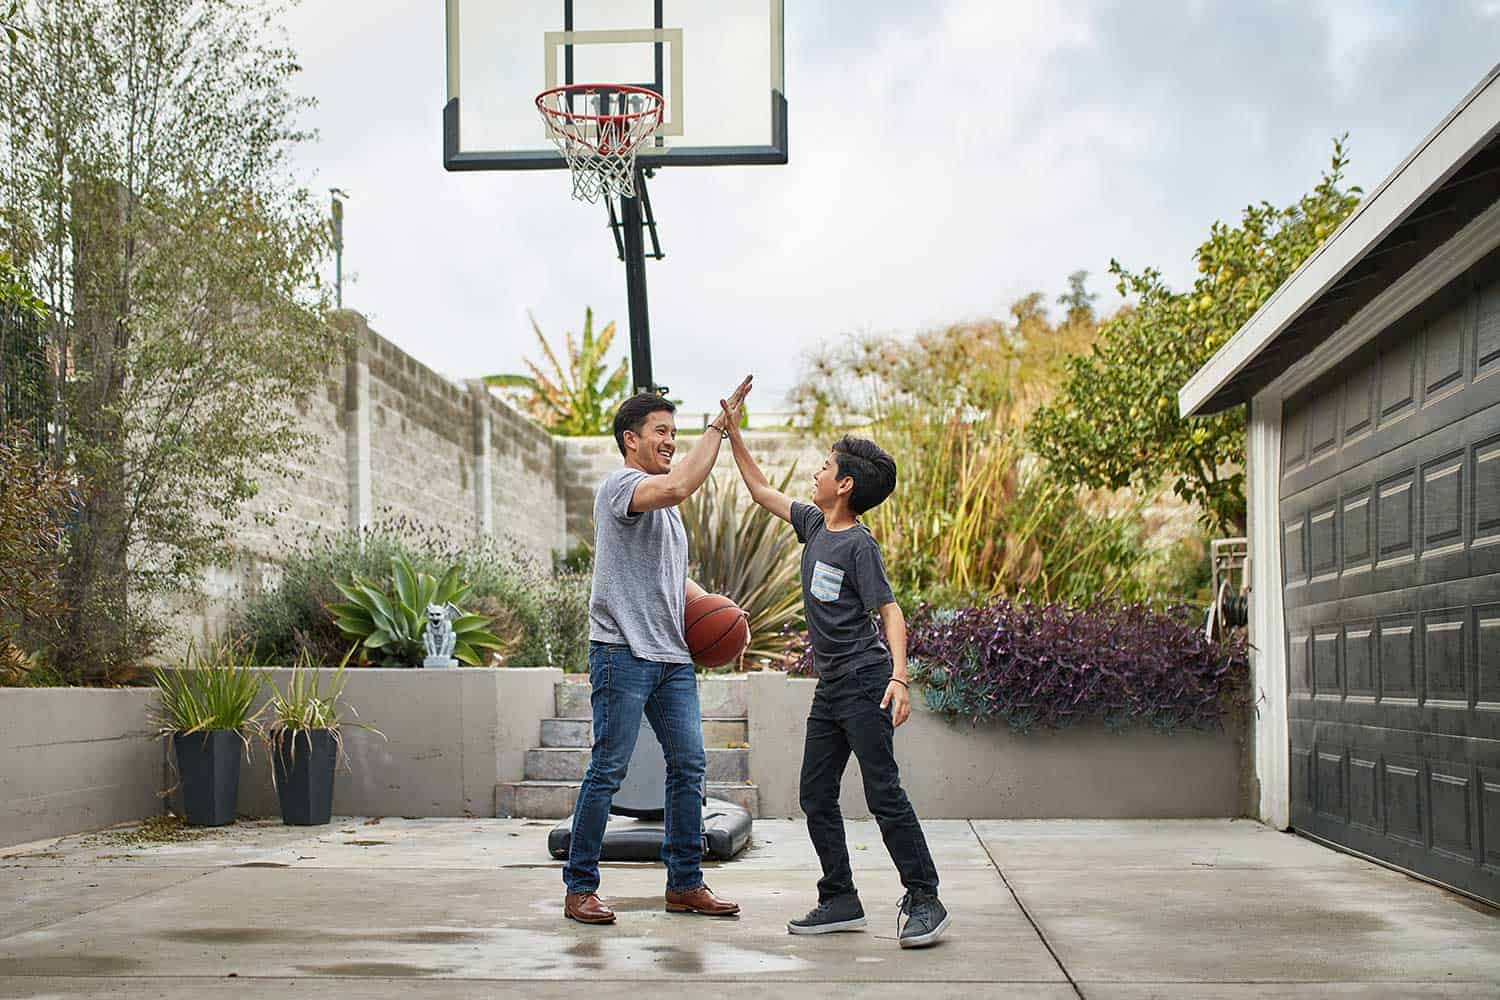 Father and son giving high-five while playing basketball